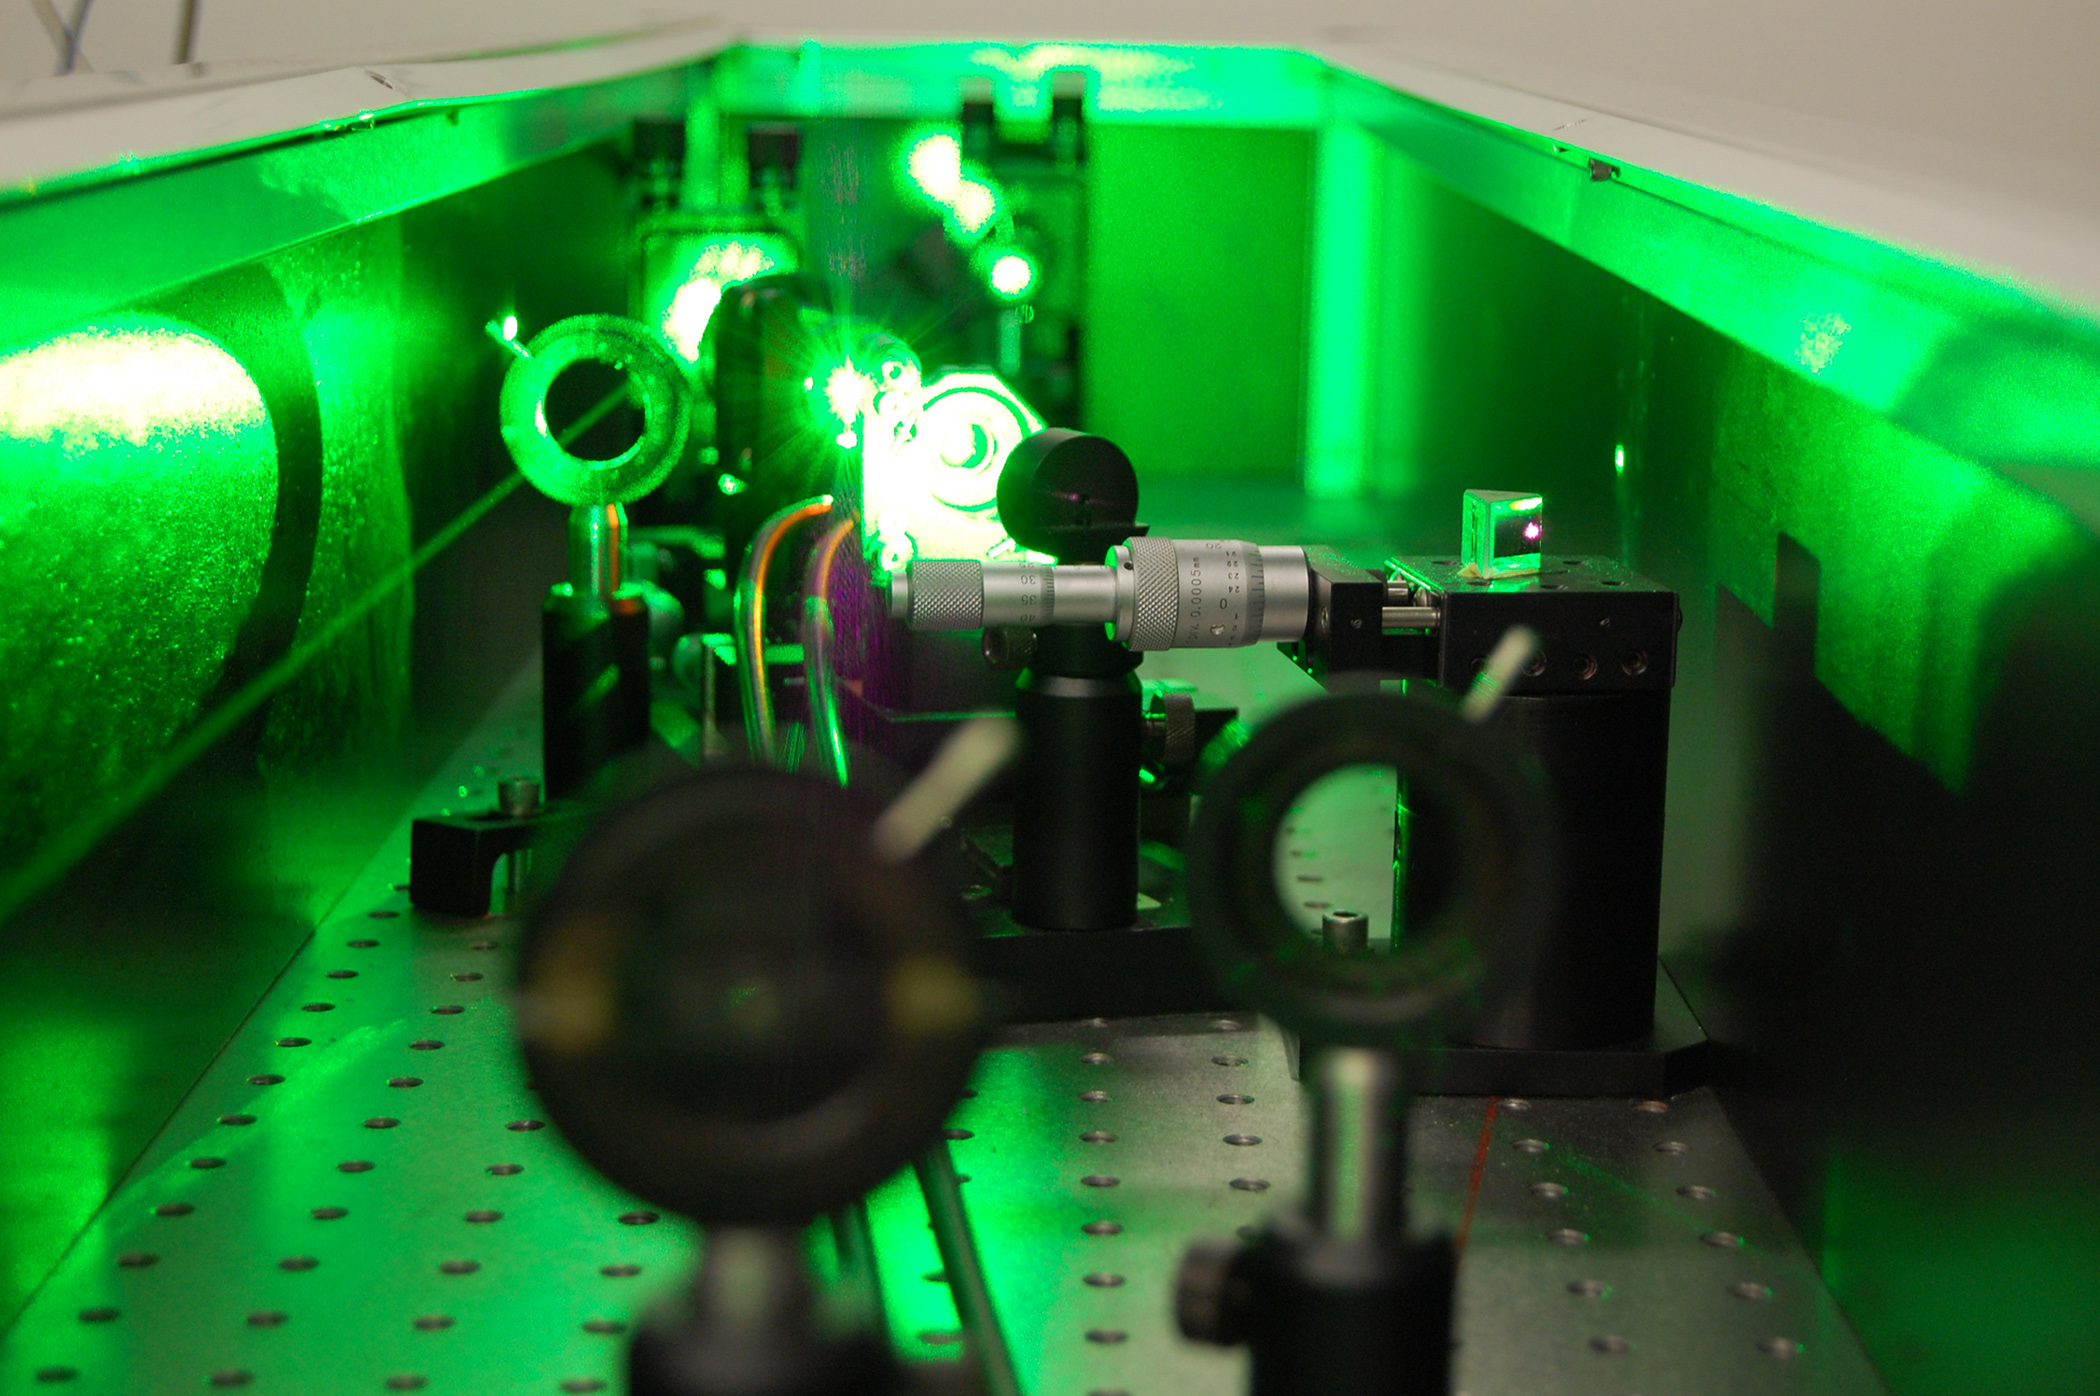 A laser in an electrical engineering lab at the University of Utah, which has won a $12 million National Science Foundation grant to launch a $21.5 million basic research program aimed at developing new materials for such uses as faster computers and communications devices and better microscopes and solar cells.